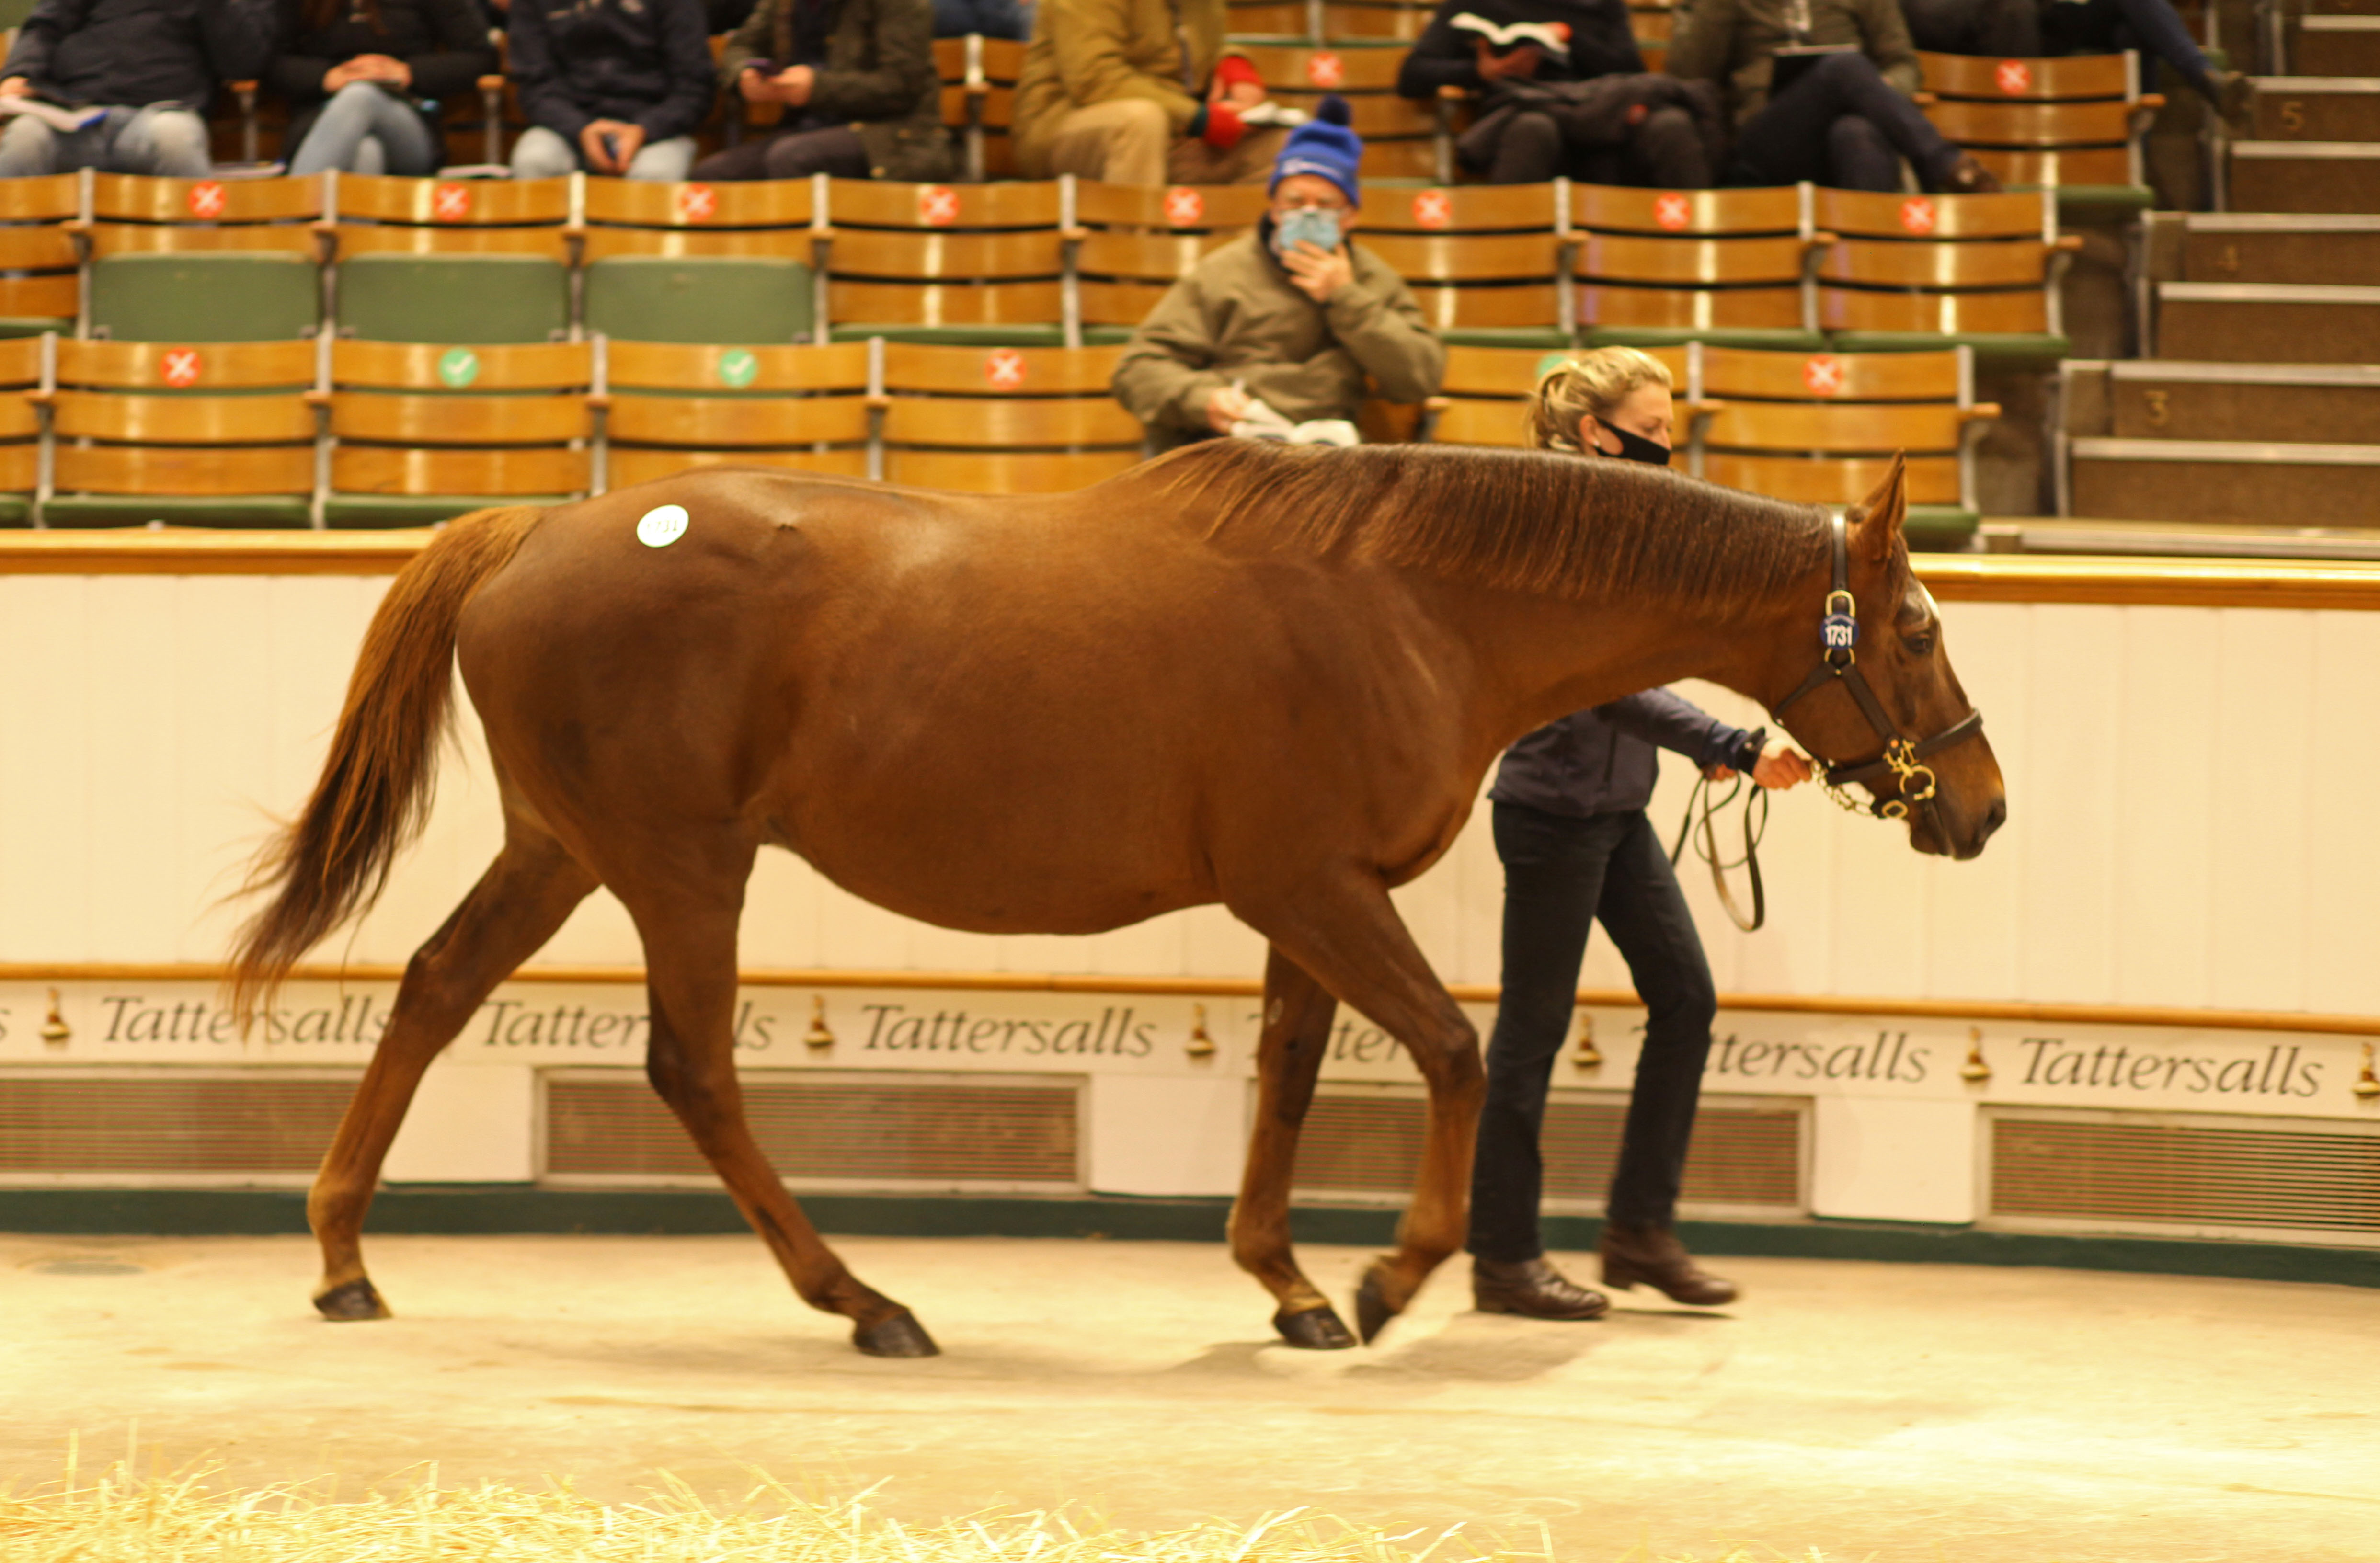 Beach Frolic sold for 2,200,000gns to top this year's Mare Sale. Picture: Tattersalls.